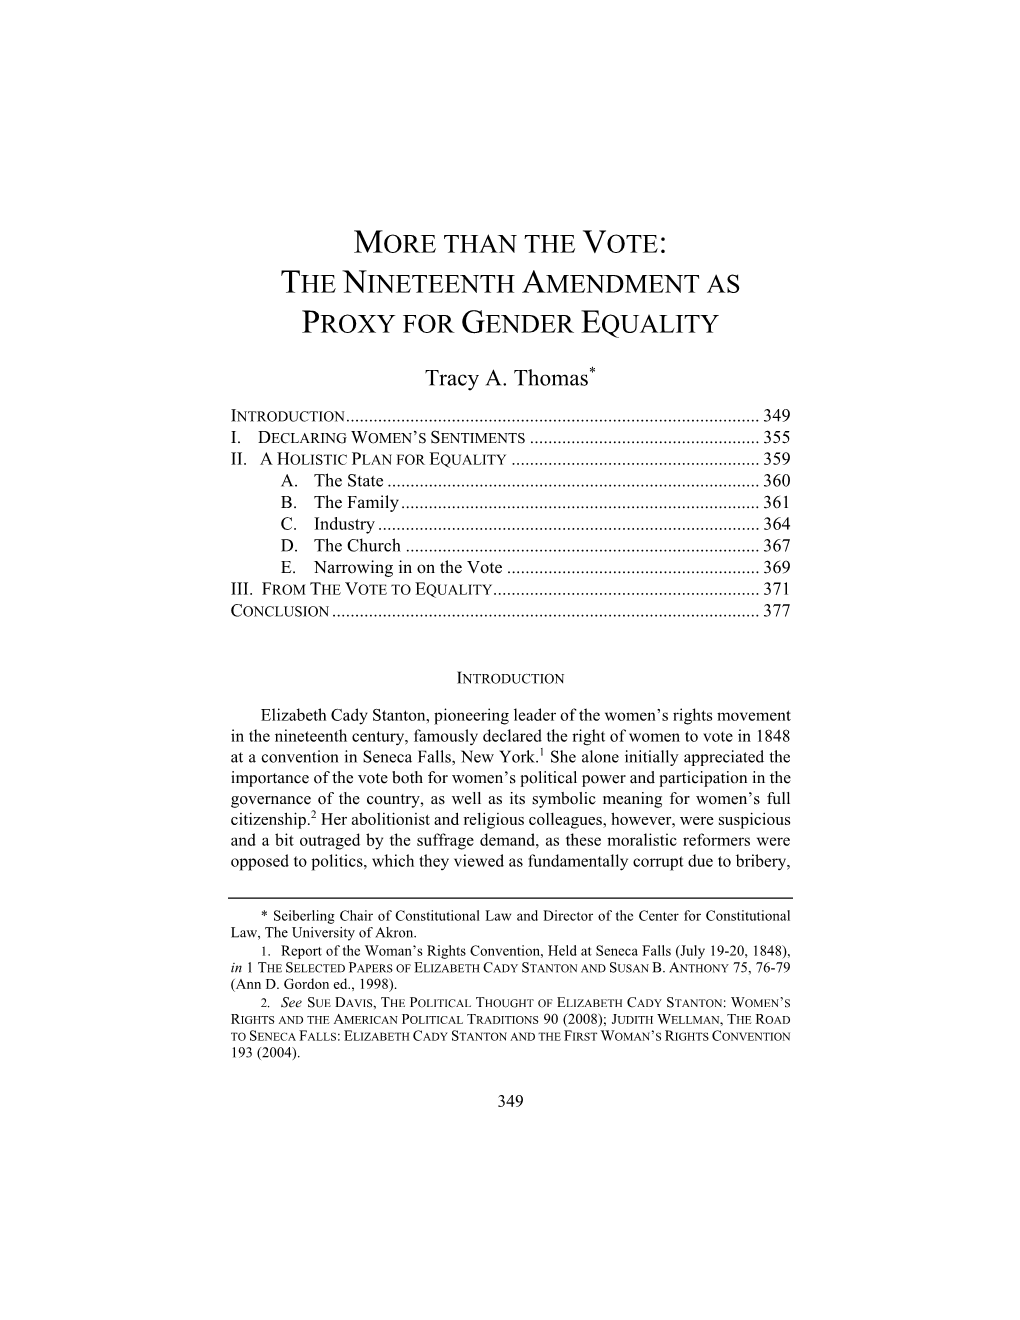 The Nineteenth Amendment As Proxy for Gender Equality